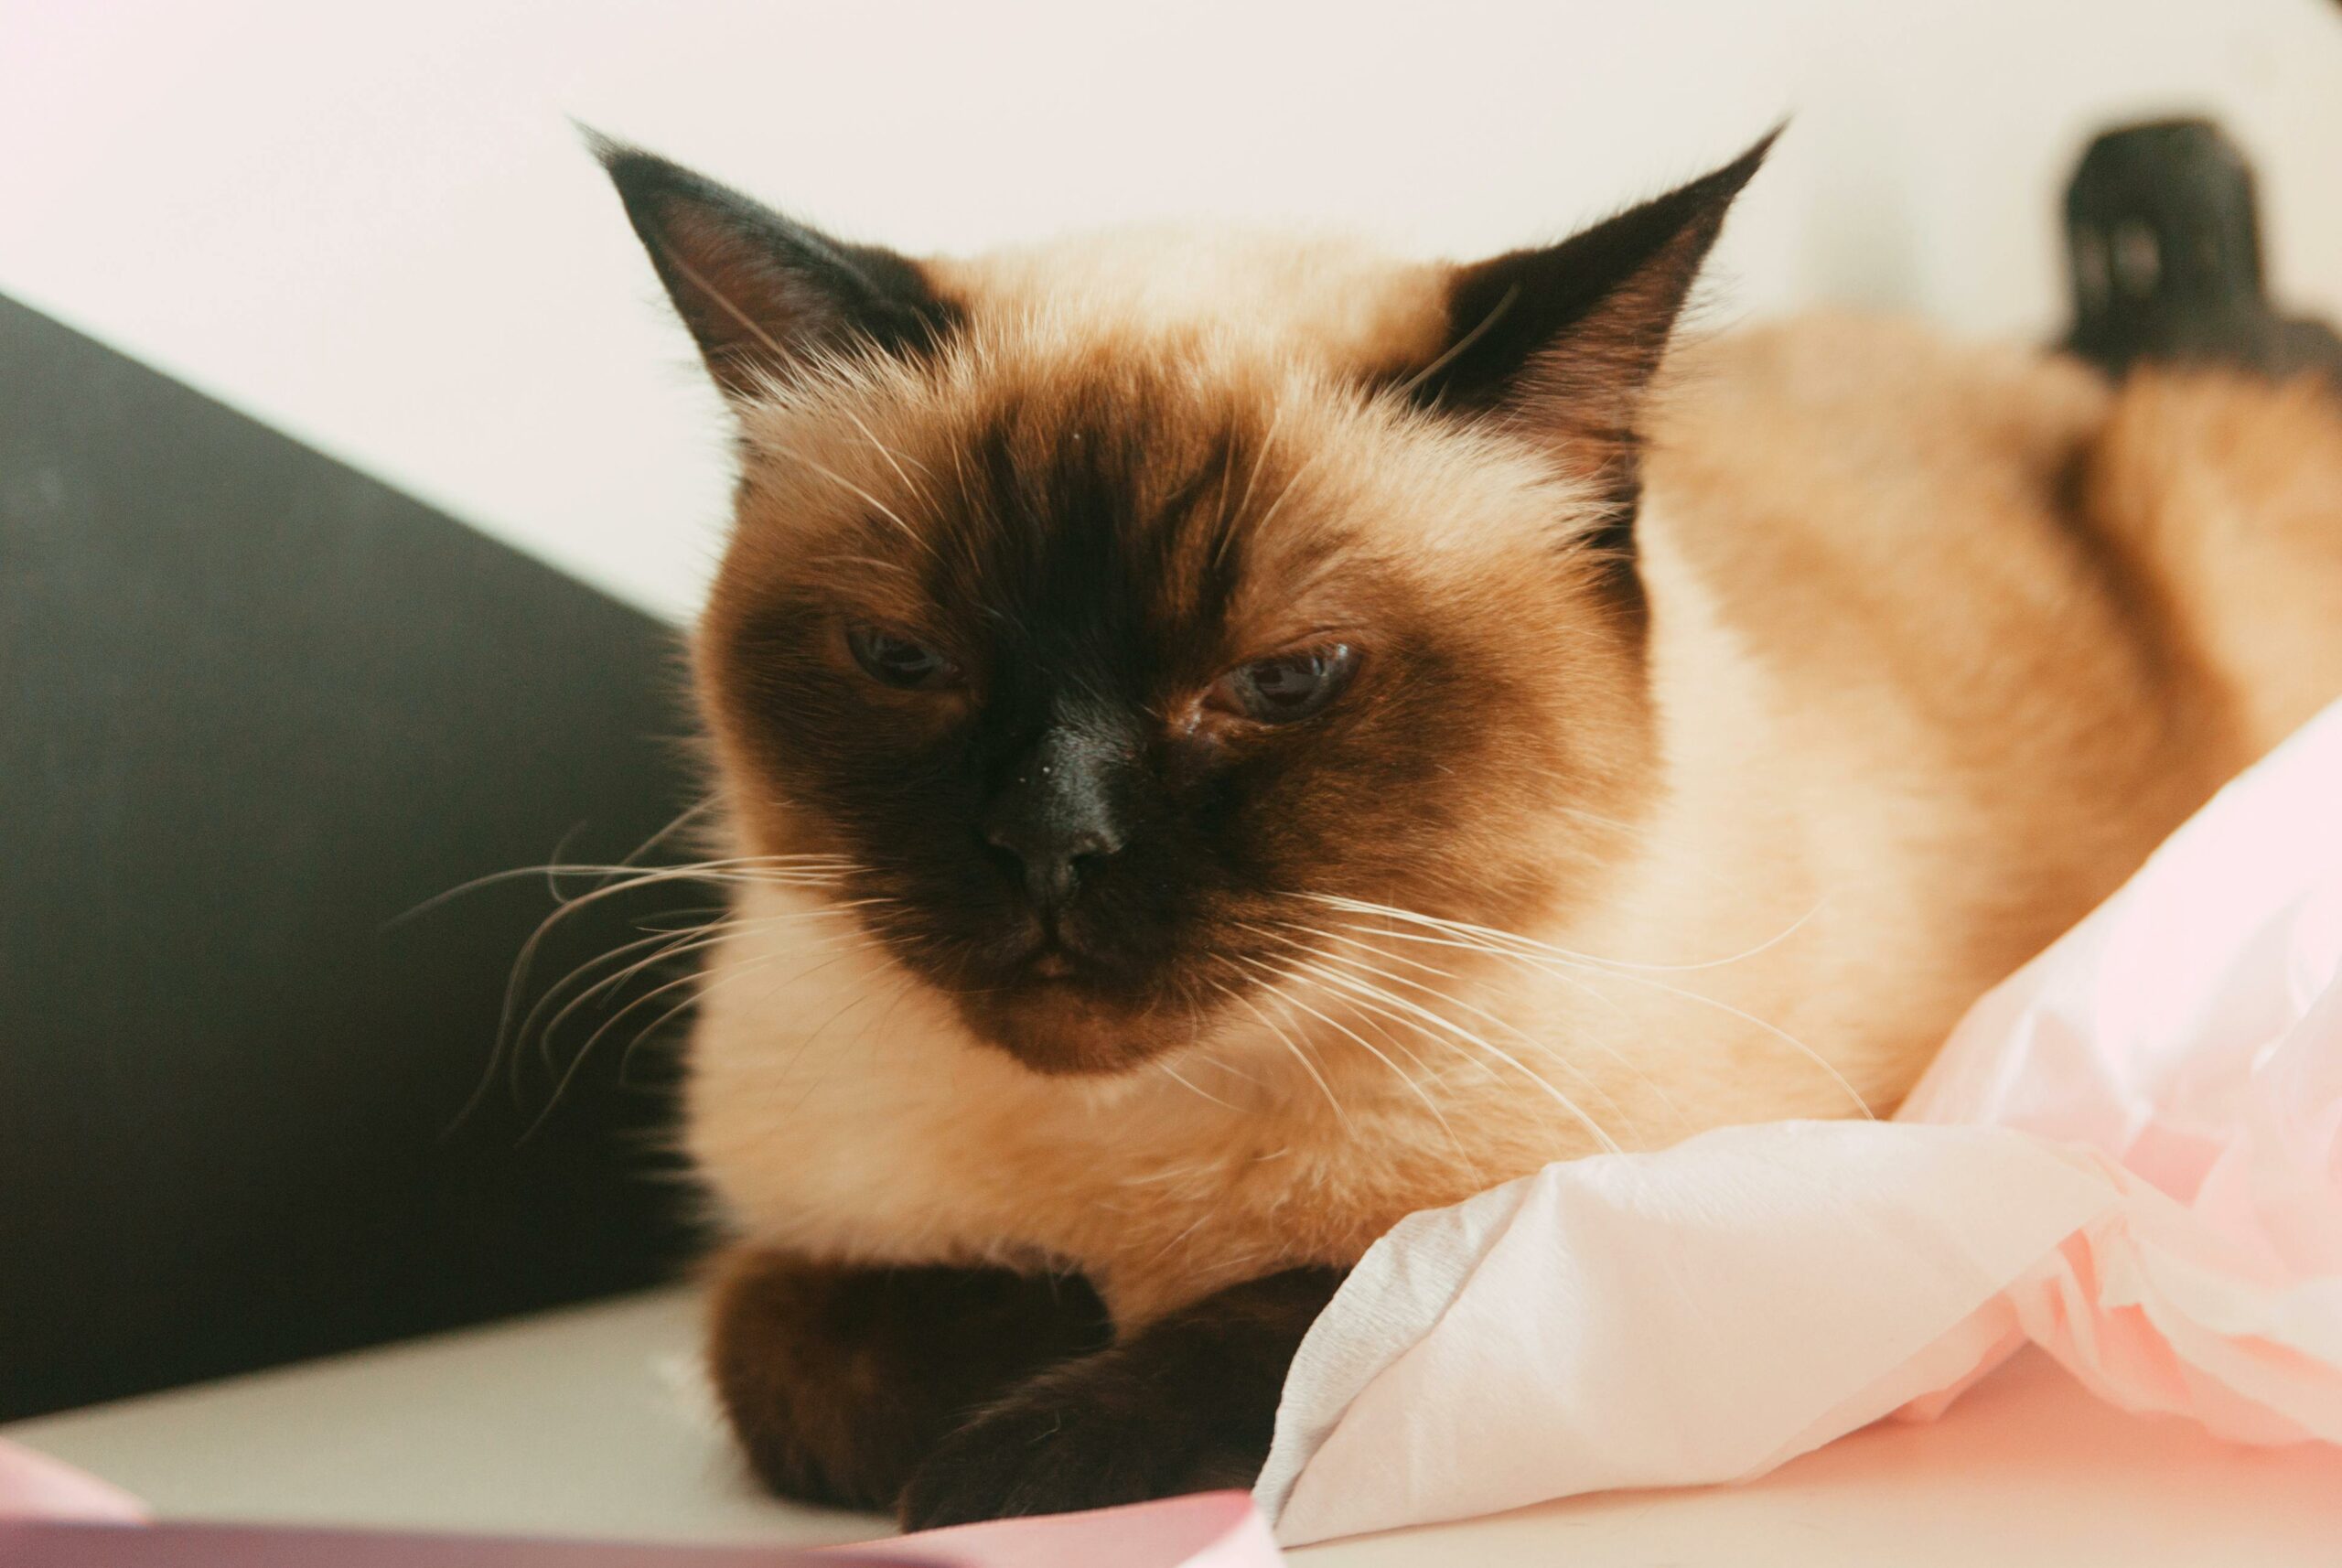 Cat Siamese: Chatty And Engaging